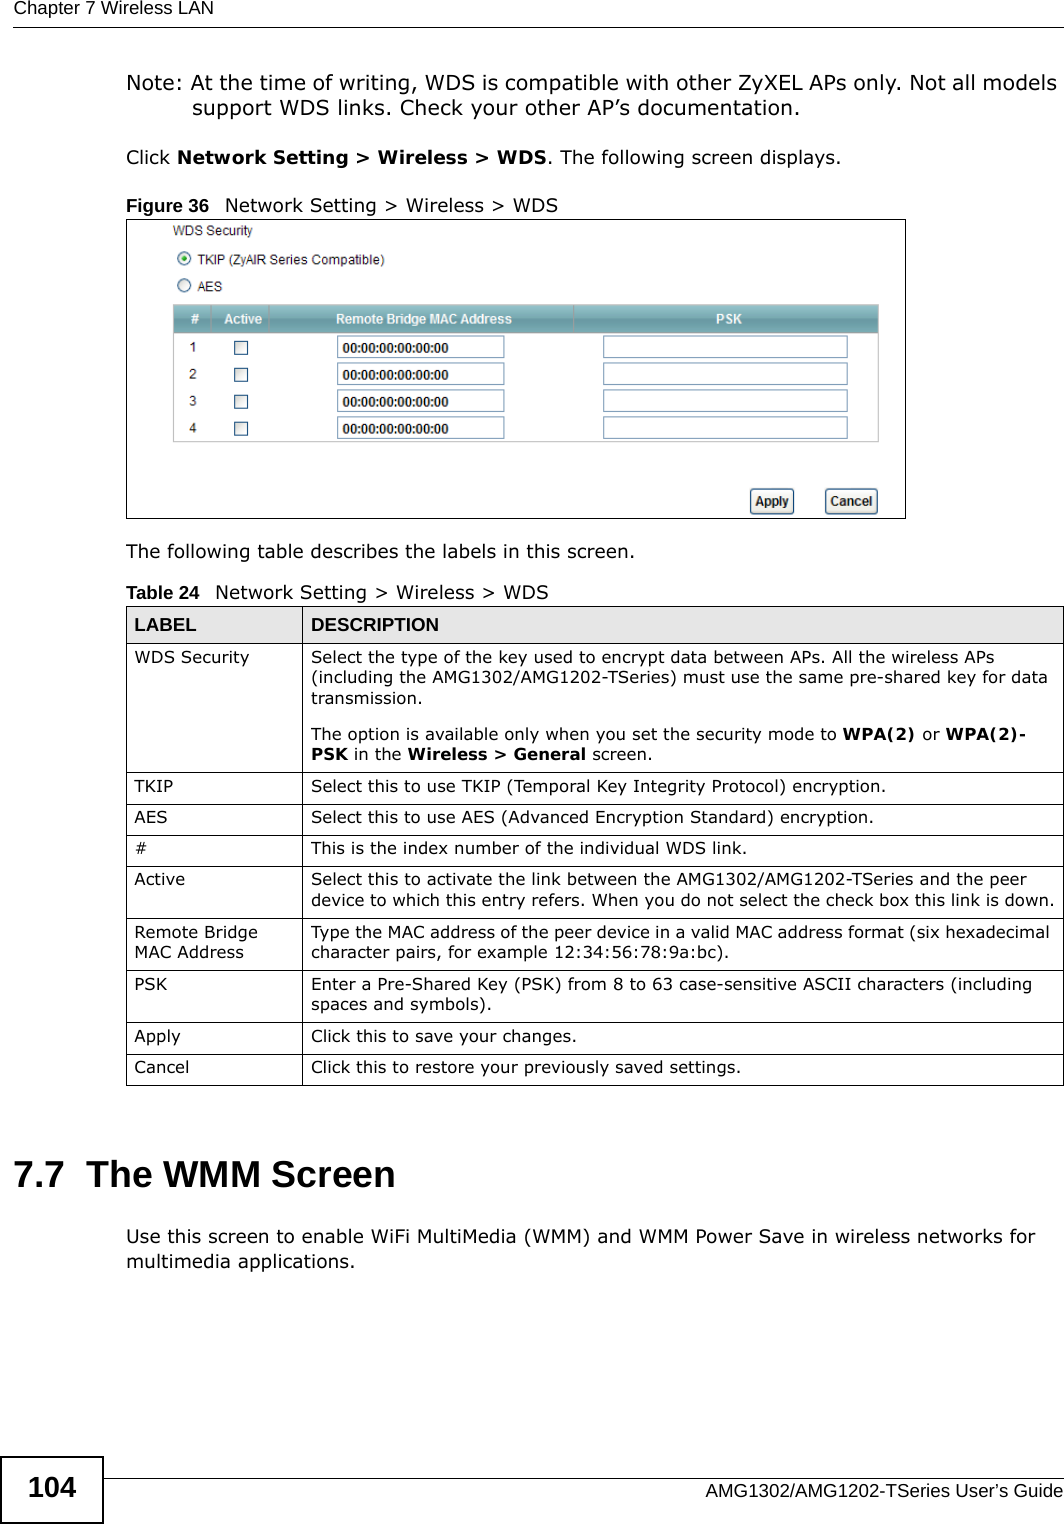 Chapter 7 Wireless LANAMG1302/AMG1202-TSeries User’s Guide104Note: At the time of writing, WDS is compatible with other ZyXEL APs only. Not all models support WDS links. Check your other AP’s documentation.Click Network Setting &gt; Wireless &gt; WDS. The following screen displays.Figure 36   Network Setting &gt; Wireless &gt; WDSThe following table describes the labels in this screen.7.7  The WMM ScreenUse this screen to enable WiFi MultiMedia (WMM) and WMM Power Save in wireless networks for multimedia applications.Table 24   Network Setting &gt; Wireless &gt; WDSLABEL DESCRIPTIONWDS Security Select the type of the key used to encrypt data between APs. All the wireless APs (including the AMG1302/AMG1202-TSeries) must use the same pre-shared key for data transmission.The option is available only when you set the security mode to WPA(2) or WPA(2)-PSK in the Wireless &gt; General screen.TKIP Select this to use TKIP (Temporal Key Integrity Protocol) encryption.AES Select this to use AES (Advanced Encryption Standard) encryption. # This is the index number of the individual WDS link.Active Select this to activate the link between the AMG1302/AMG1202-TSeries and the peer device to which this entry refers. When you do not select the check box this link is down.Remote Bridge MAC AddressType the MAC address of the peer device in a valid MAC address format (six hexadecimal character pairs, for example 12:34:56:78:9a:bc).PSK Enter a Pre-Shared Key (PSK) from 8 to 63 case-sensitive ASCII characters (including spaces and symbols).Apply Click this to save your changes.Cancel Click this to restore your previously saved settings.